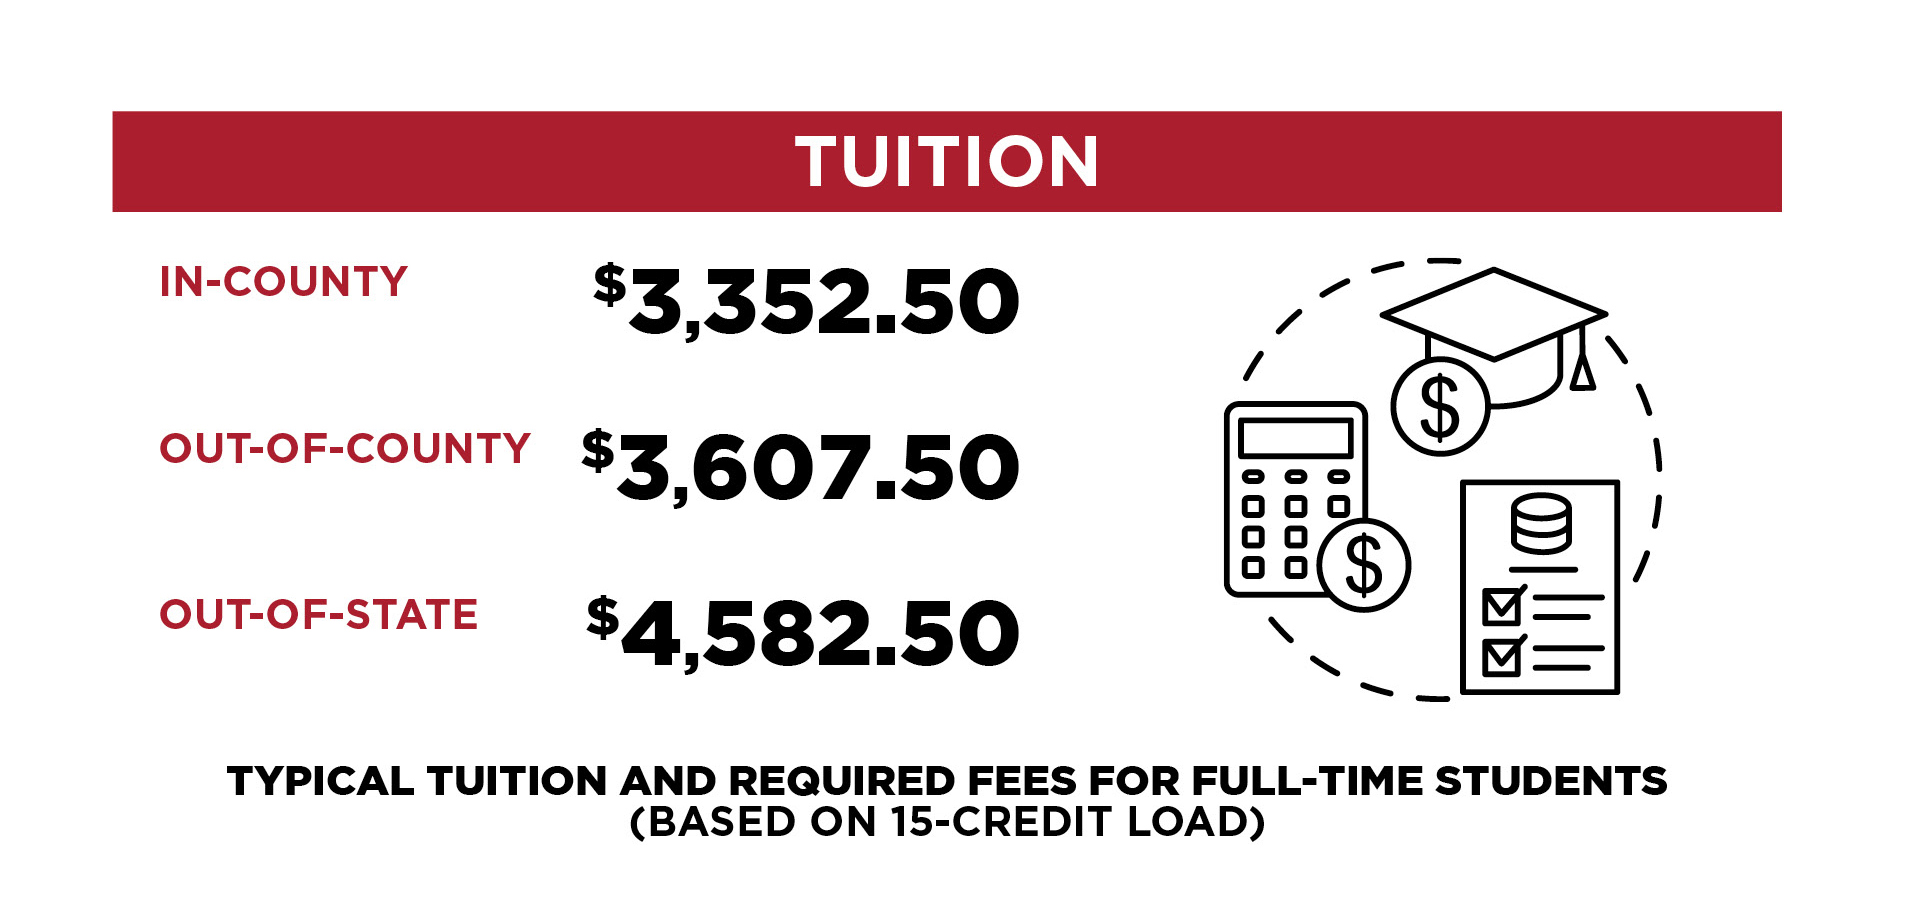 Tuition Data Infographic - See below for accessible text data